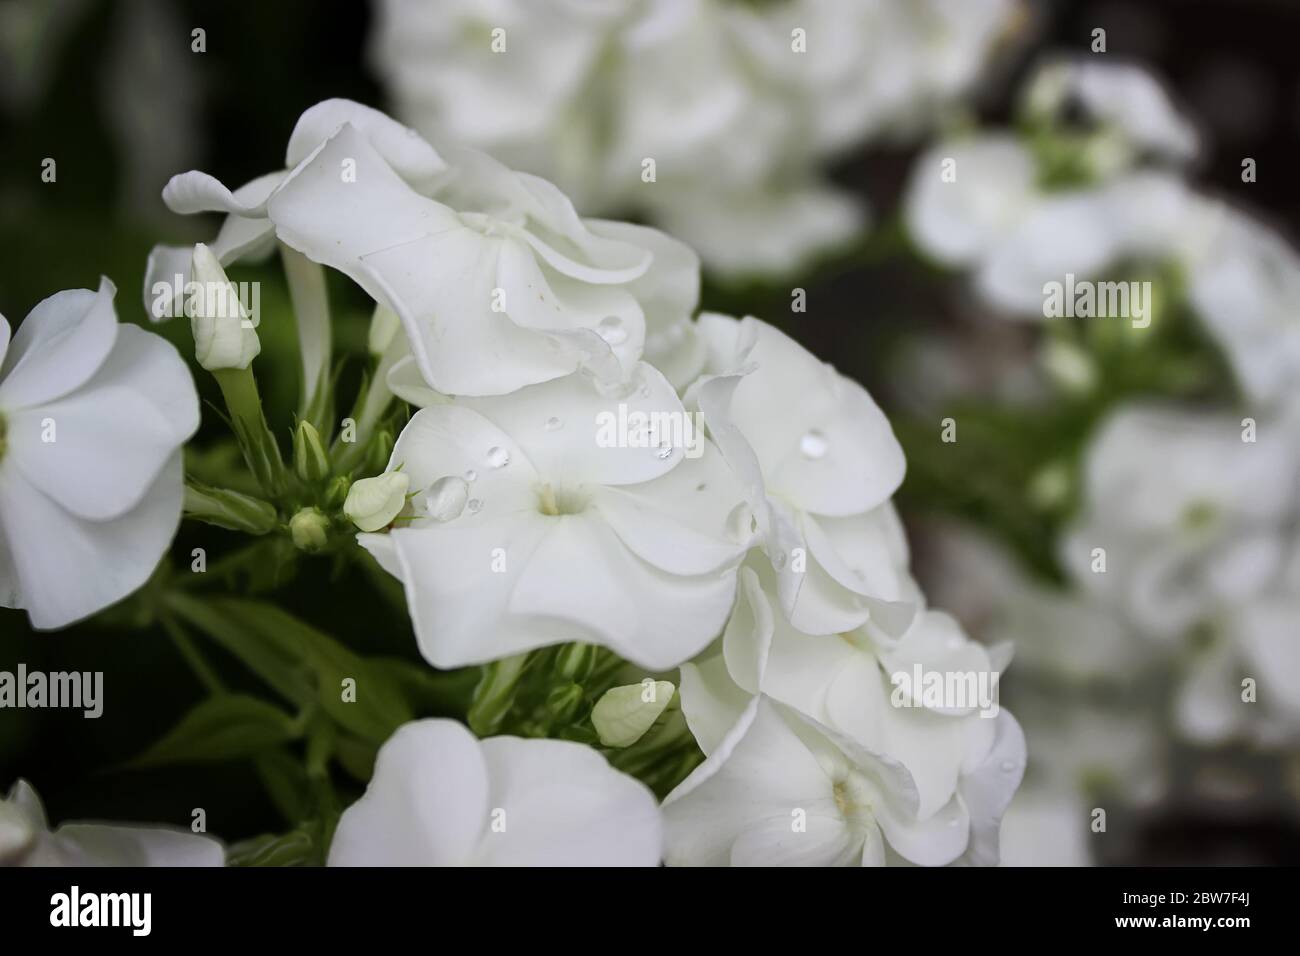 Large clusters of white Garden Phlox flowering plant on brown background with leaves. White phlox flowers in the garden. It is theme of seasons. A clo Stock Photo